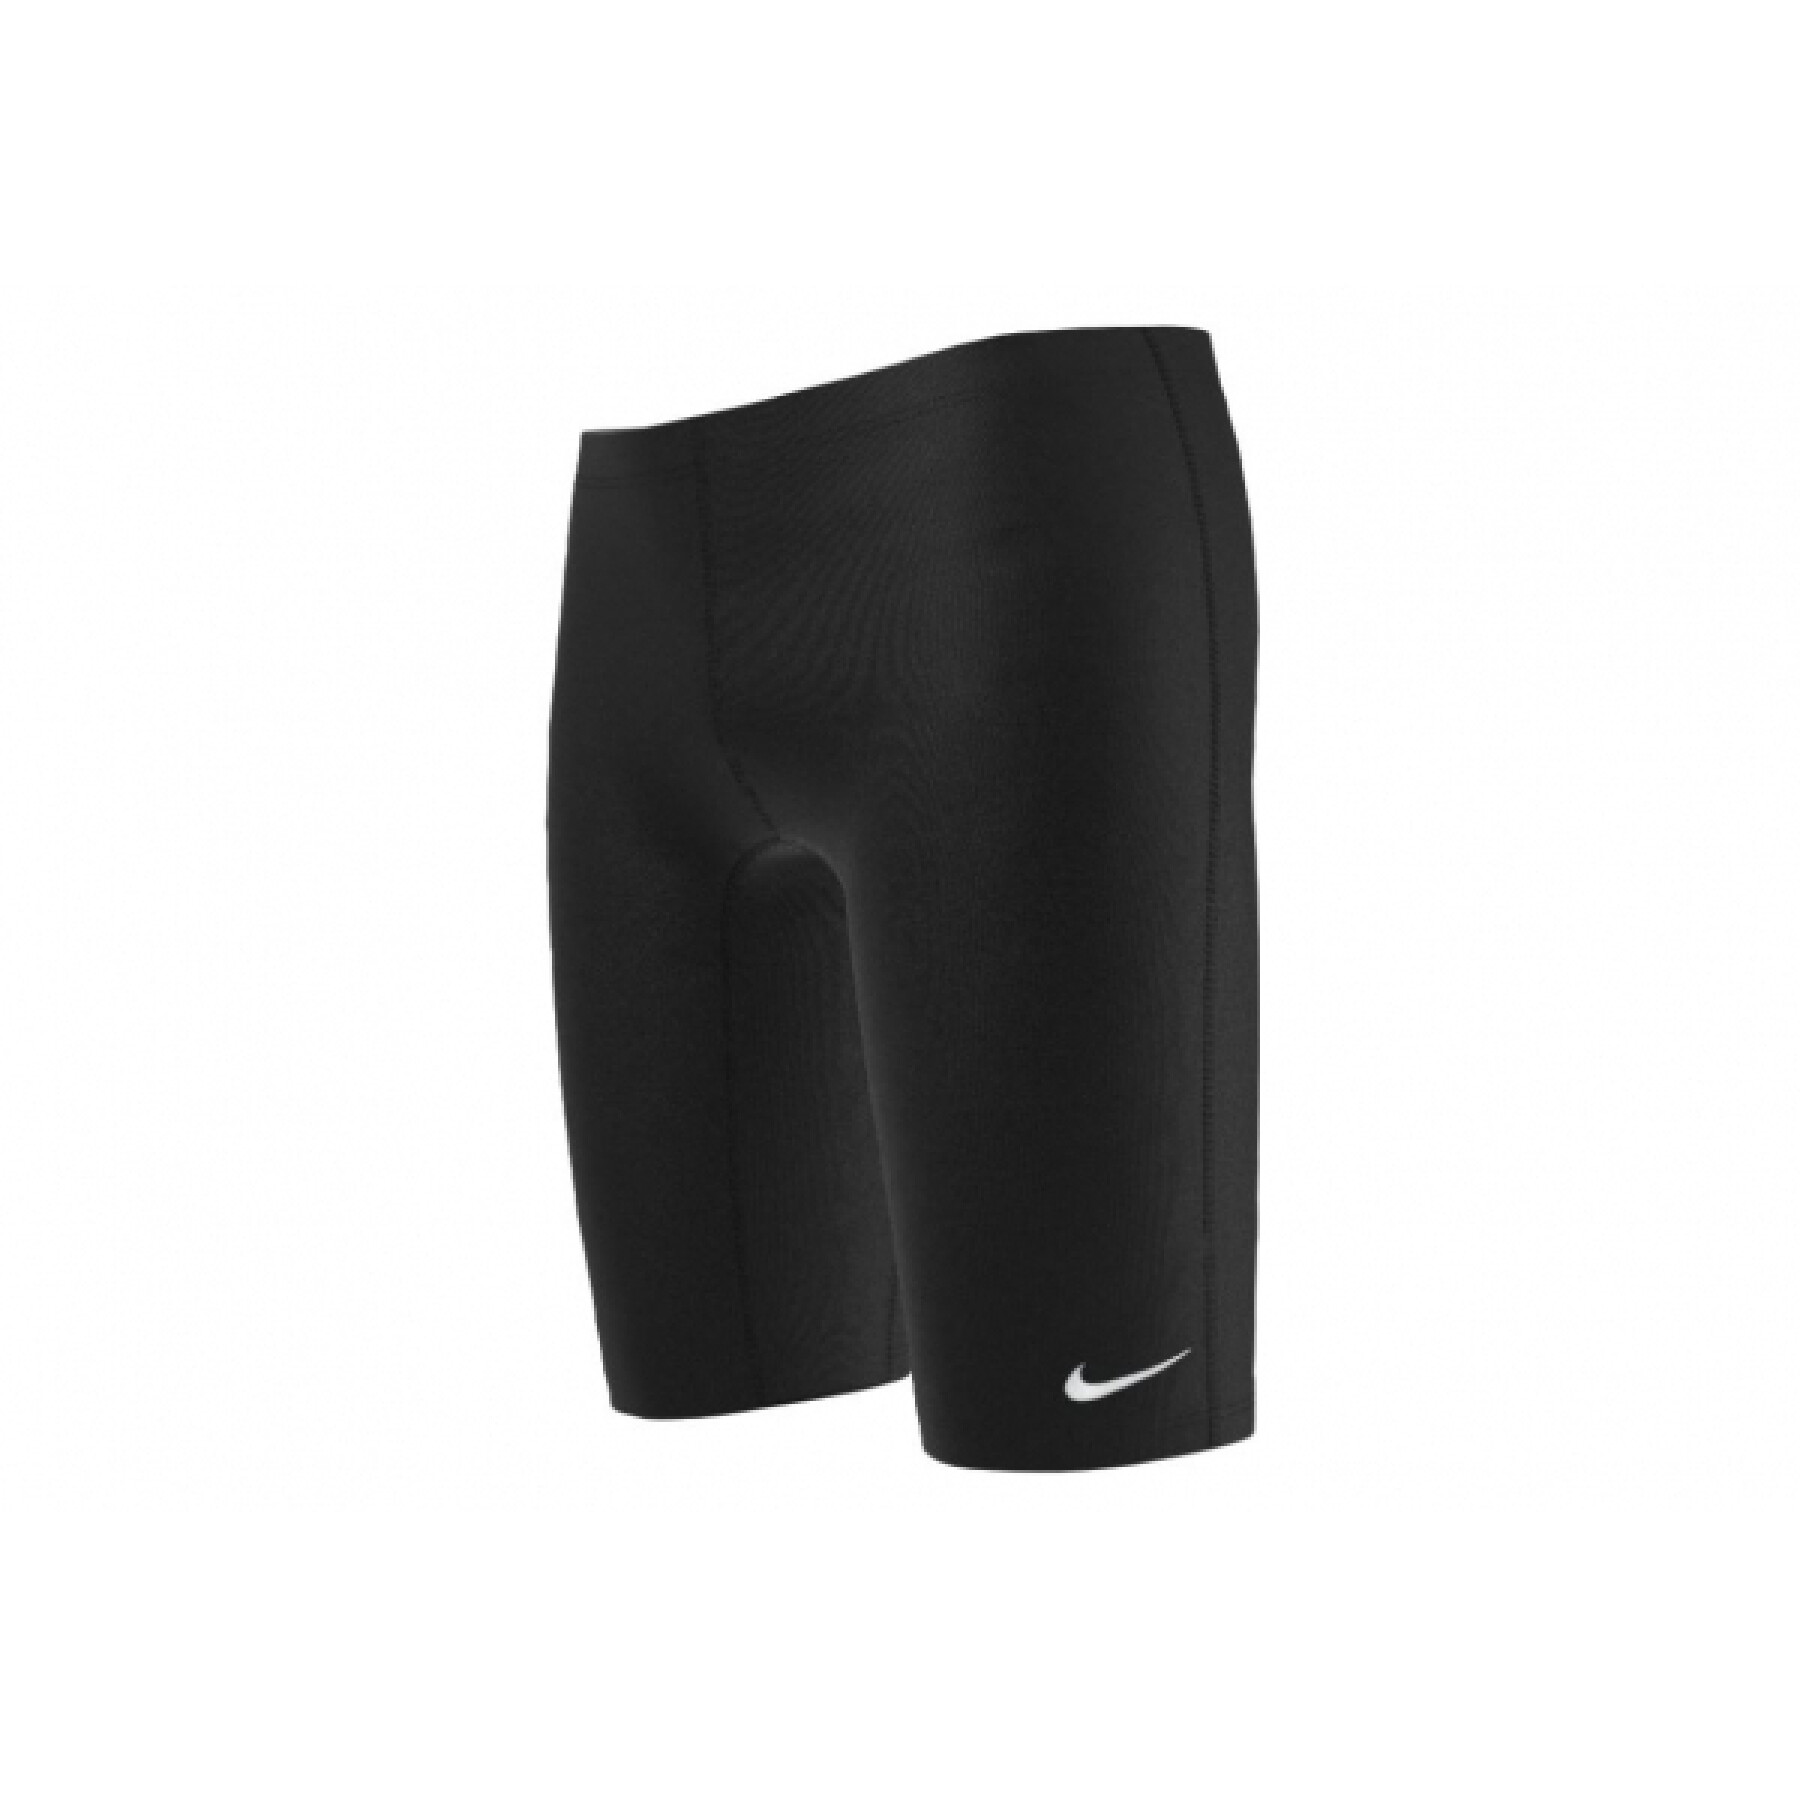 Jammer per bambini Nike Swim Hydrastrong Solid